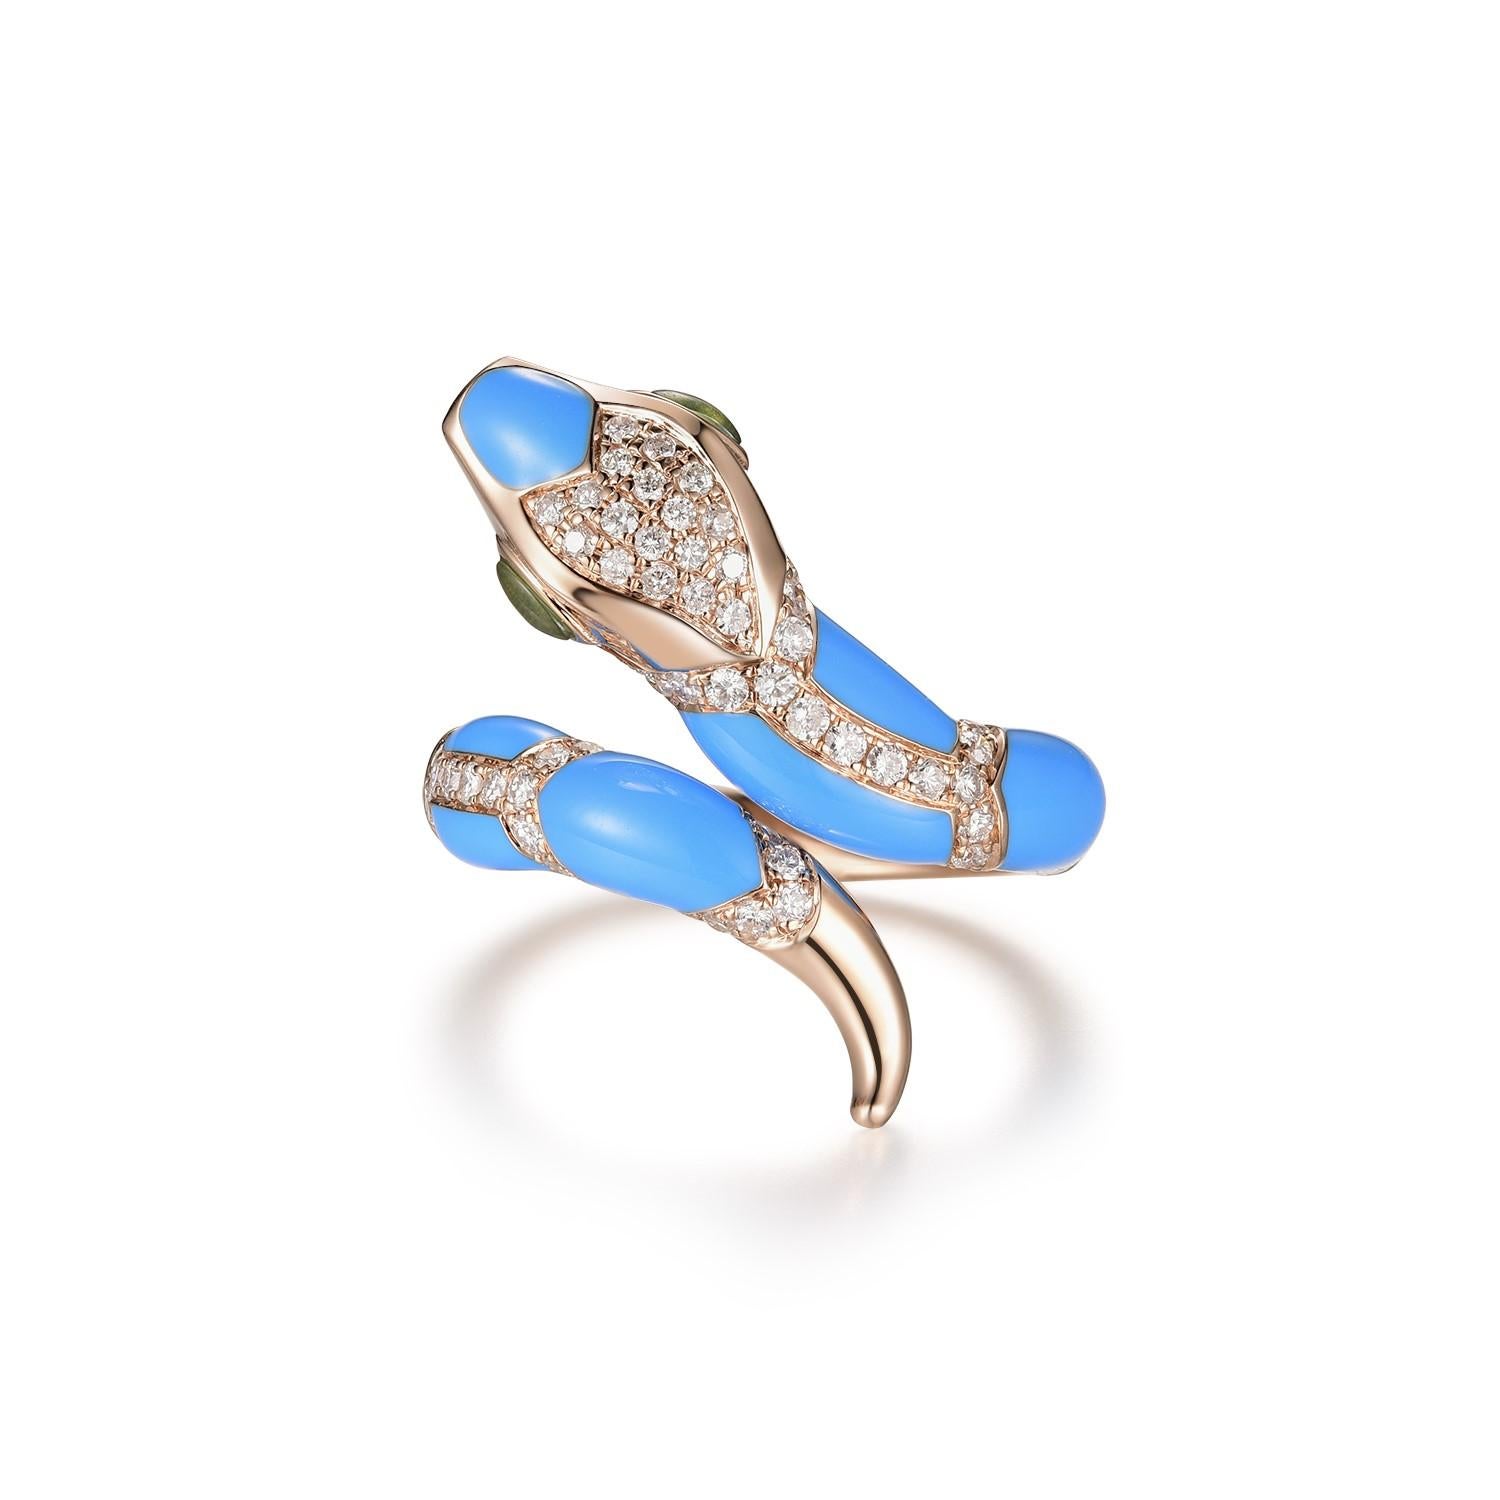 This stunning snake ring features 0.50 carat of white round diamonds, the body is covered with blue enamel. The eyes of the ring is set with garnet (eye). The snake can be customized in any color or stones. Feel free to contact me for inquiry. More